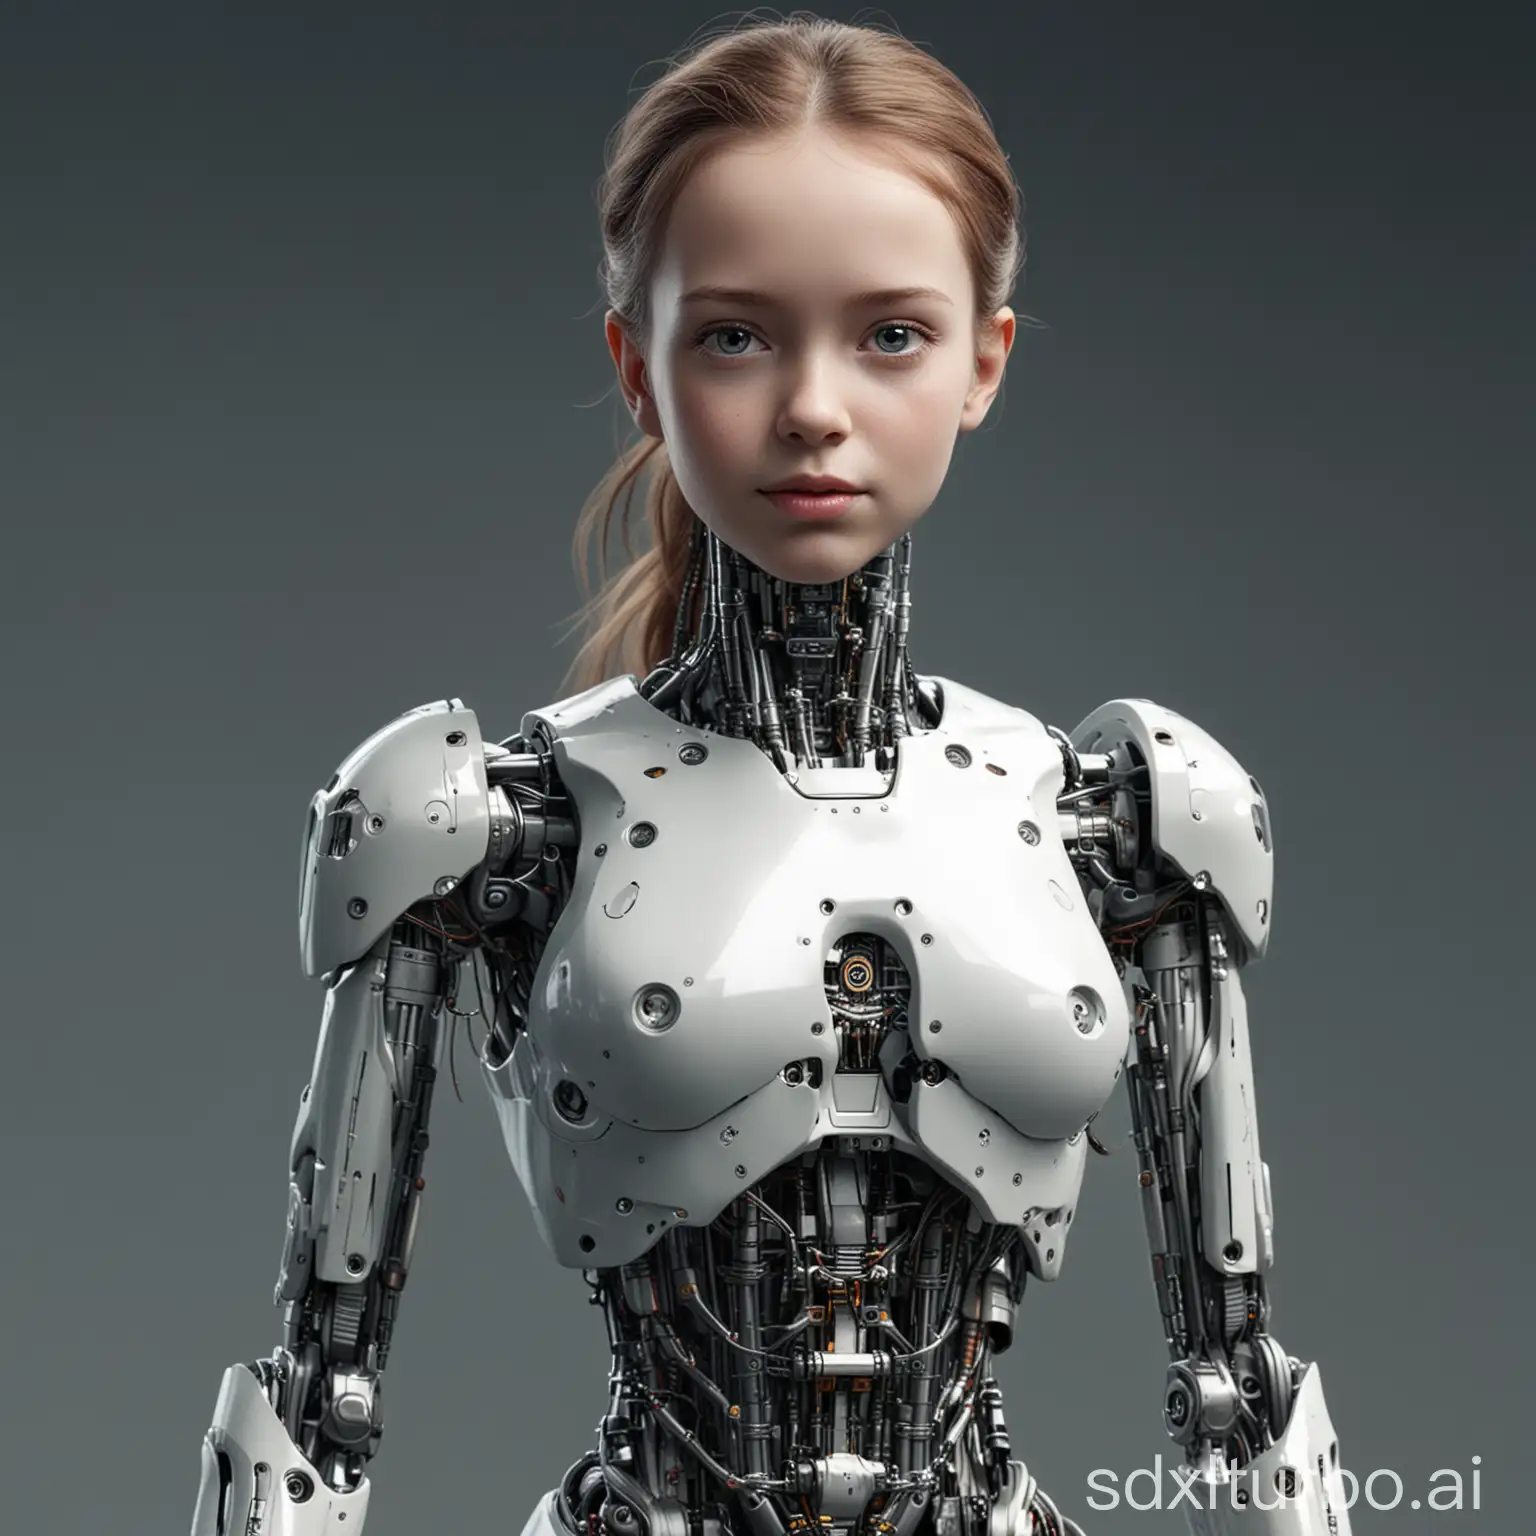 female robot-human, young girl with cybernetic implants, full height, future